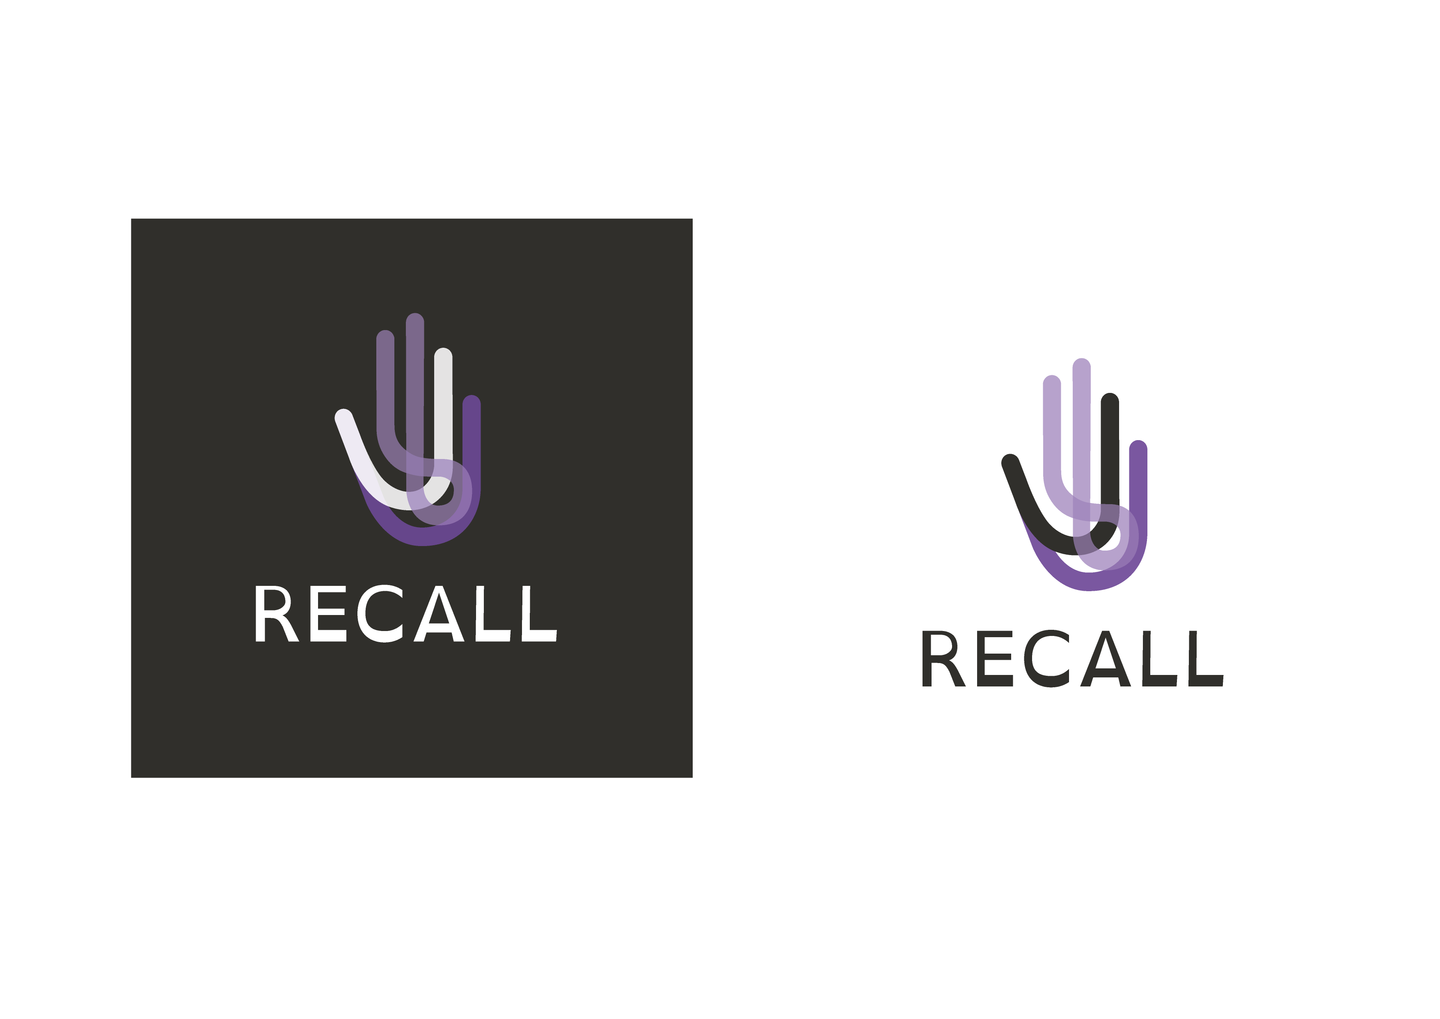 'Recall' purple hand shaped logo on a black background, also on a white background